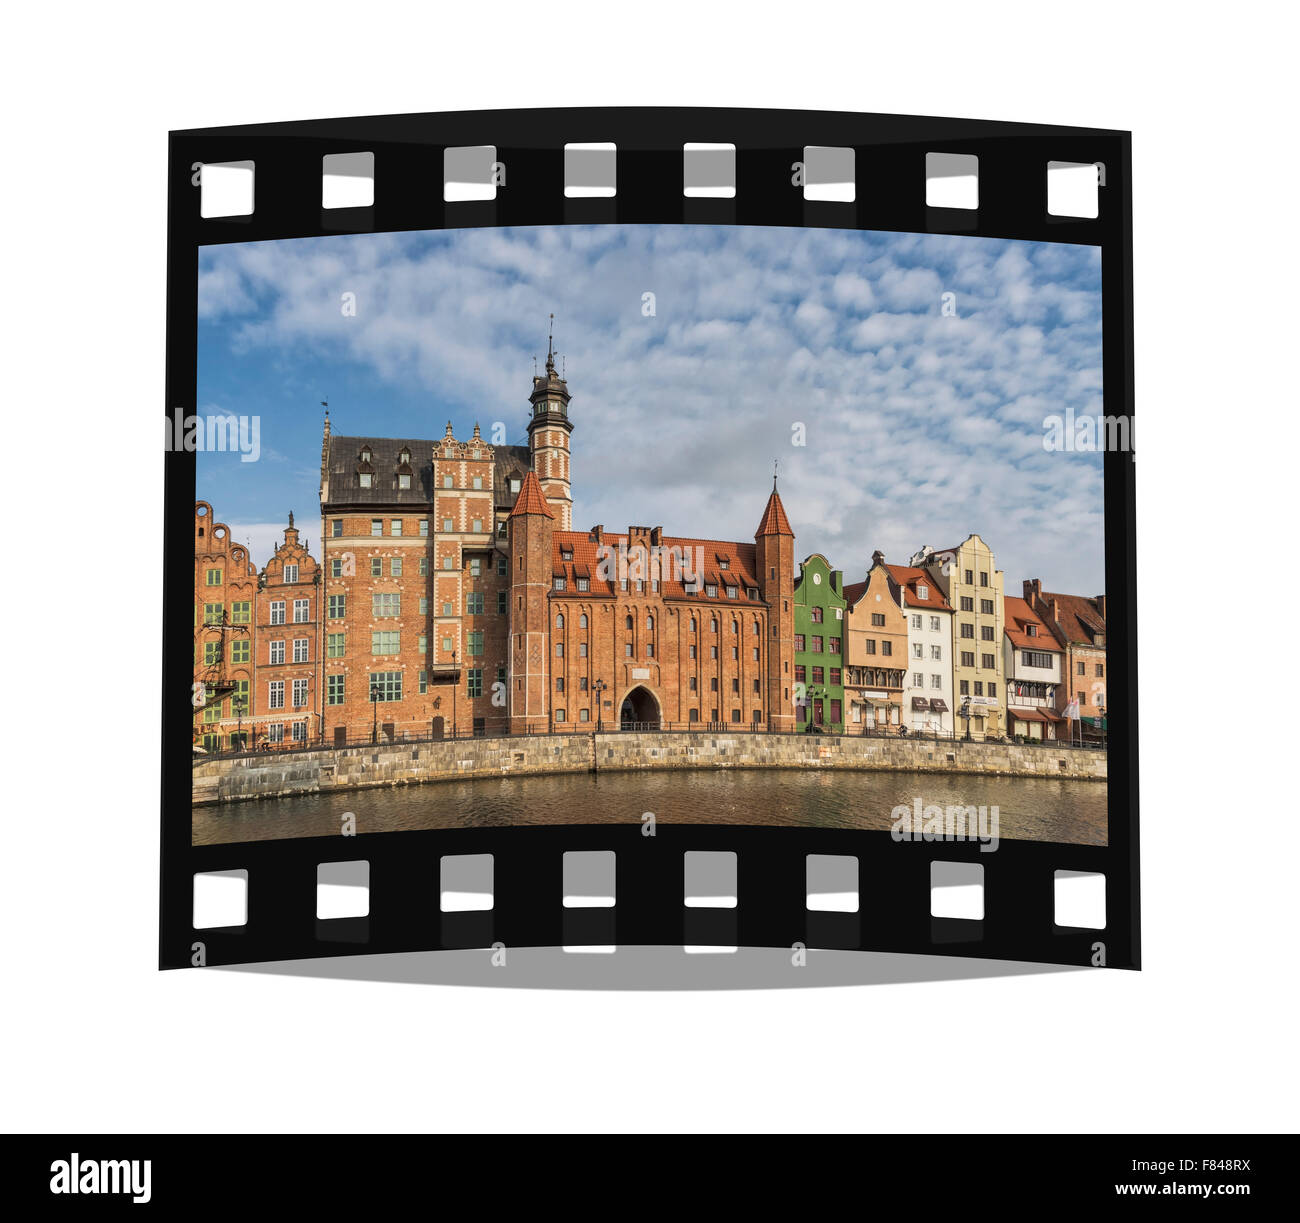 View over the Motlawa to the Brama Mariacka Gate. The Gate was built in late Gothic style, Gdansk, Pomerania, Poland, Europe Stock Photo